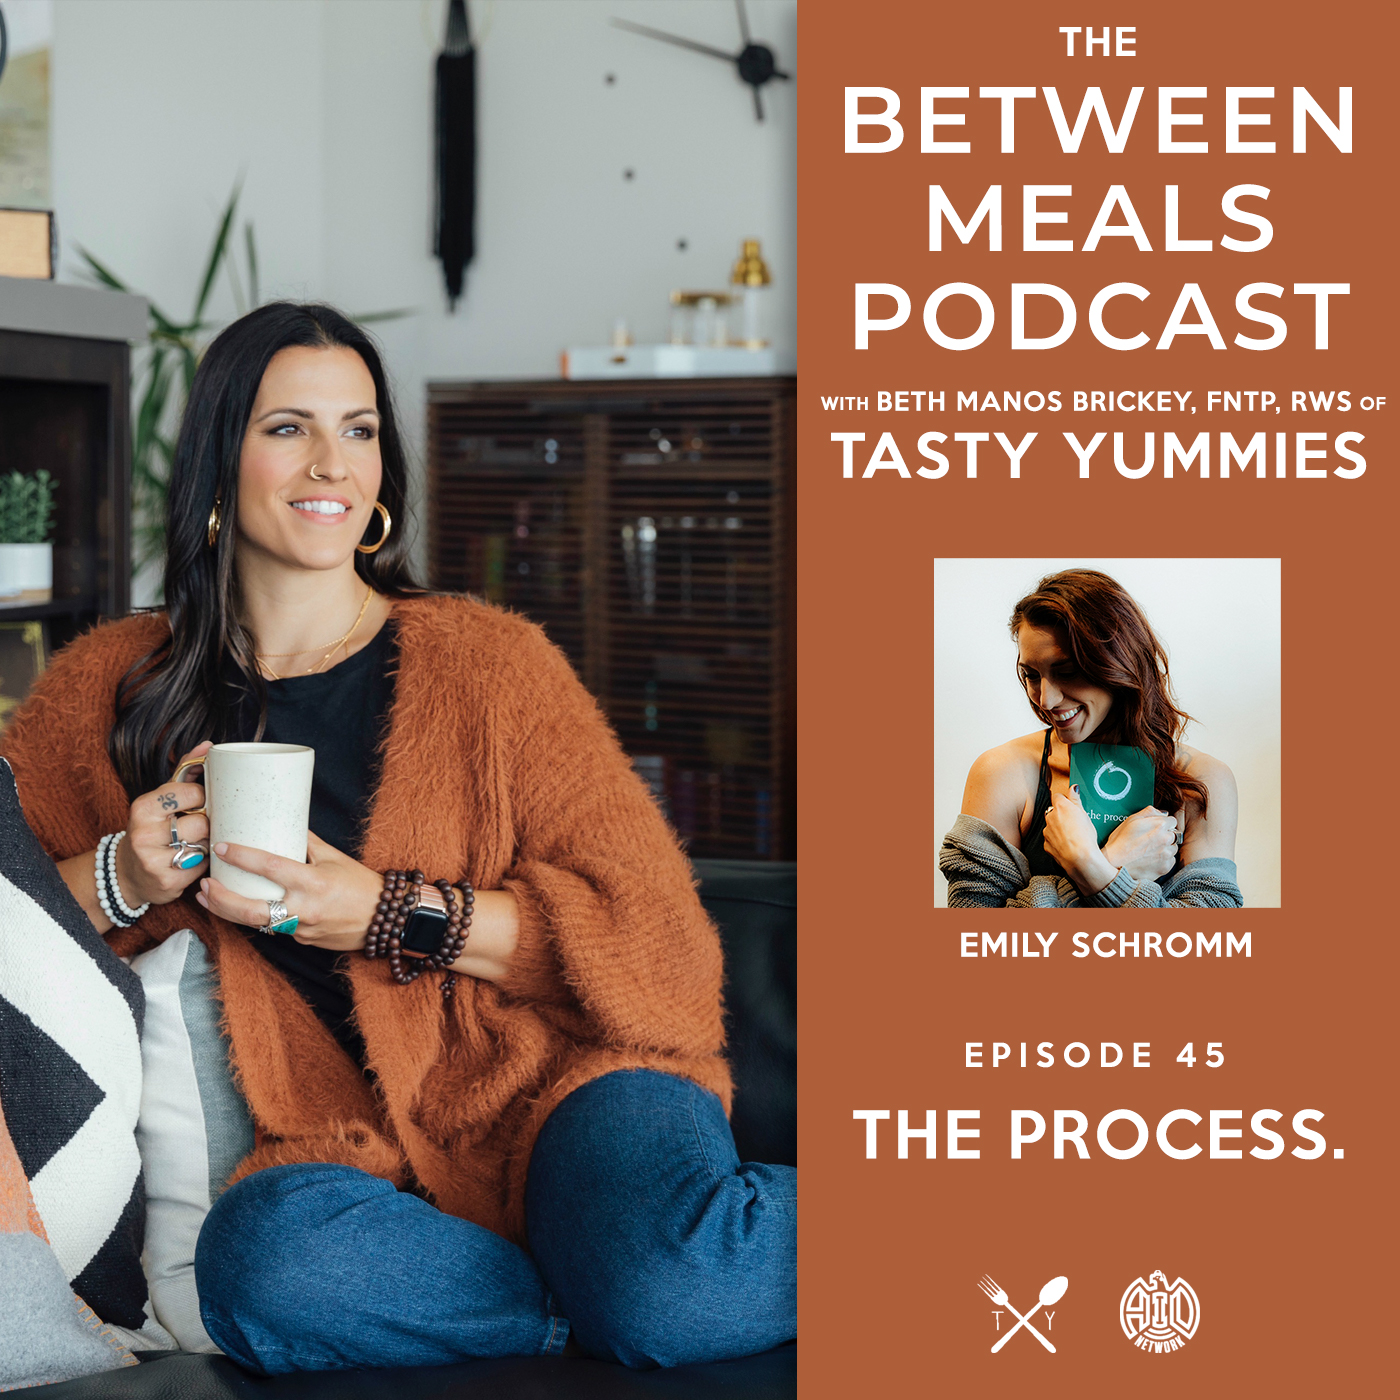 Between Meals Podcast. Episode 45: The Process with Emily Schromm